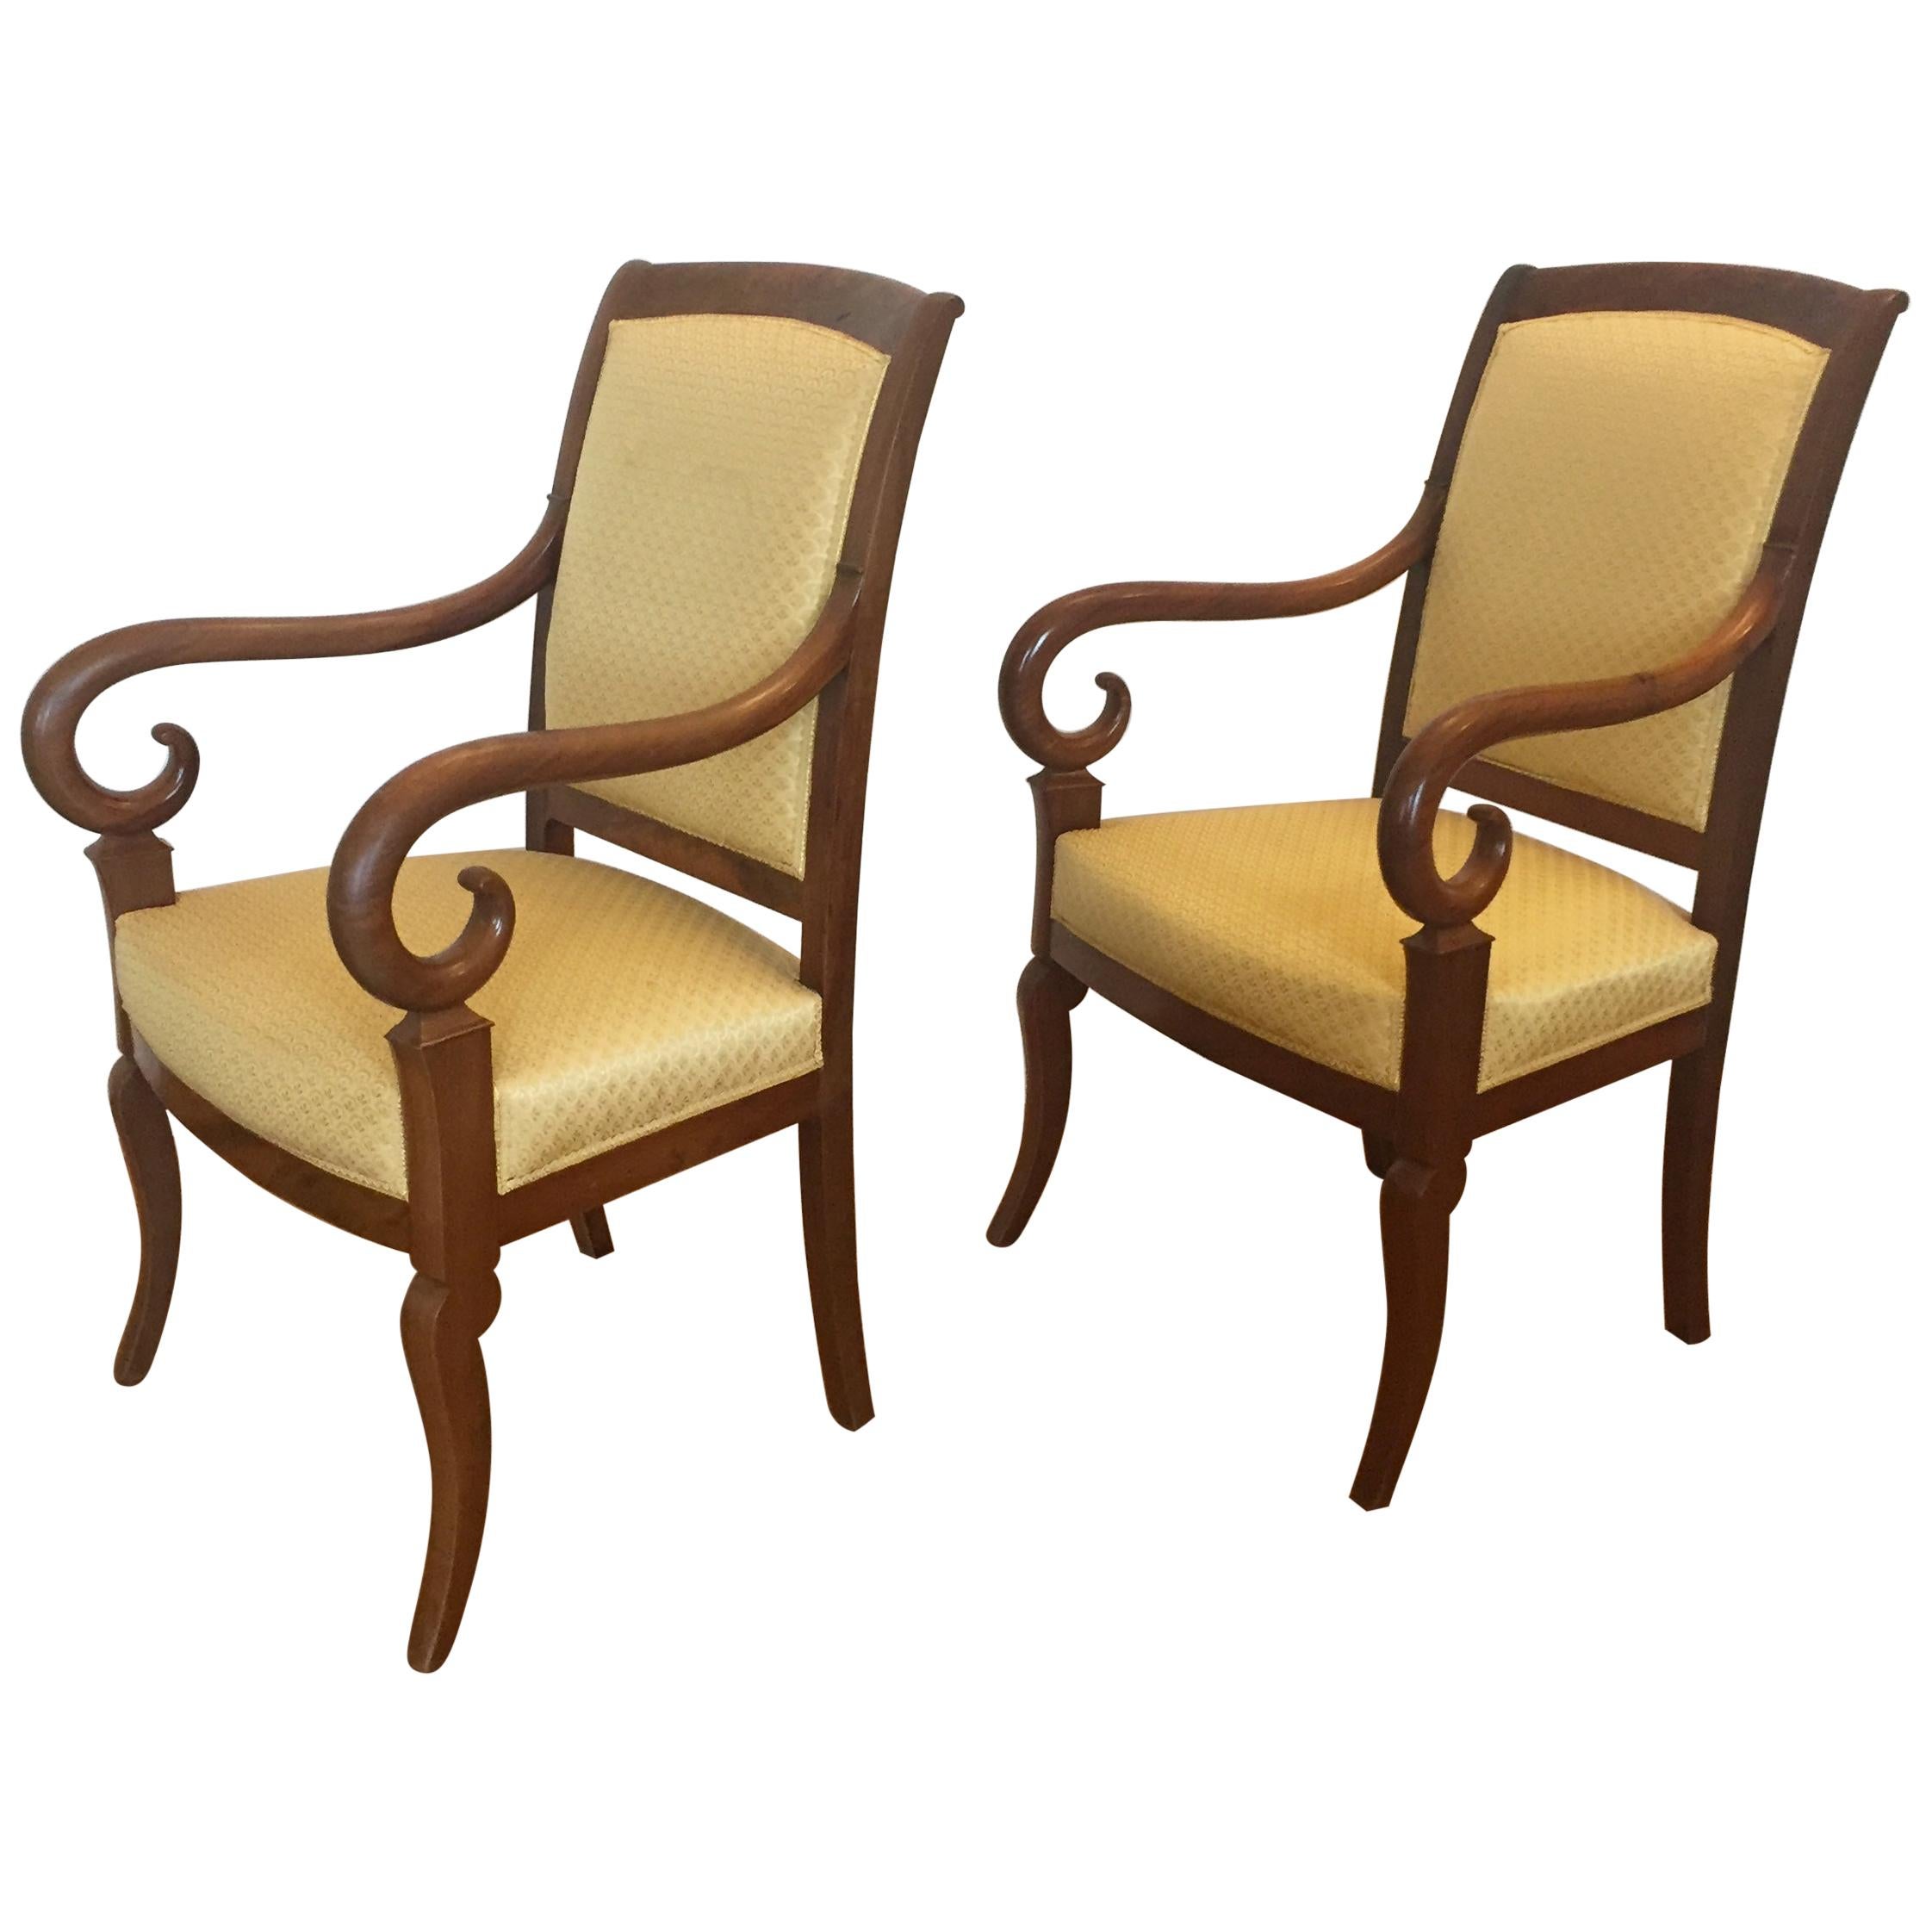 Pair of French Louis Phillipe Mahogany Armchairs Recovered in a Yellow Fabric